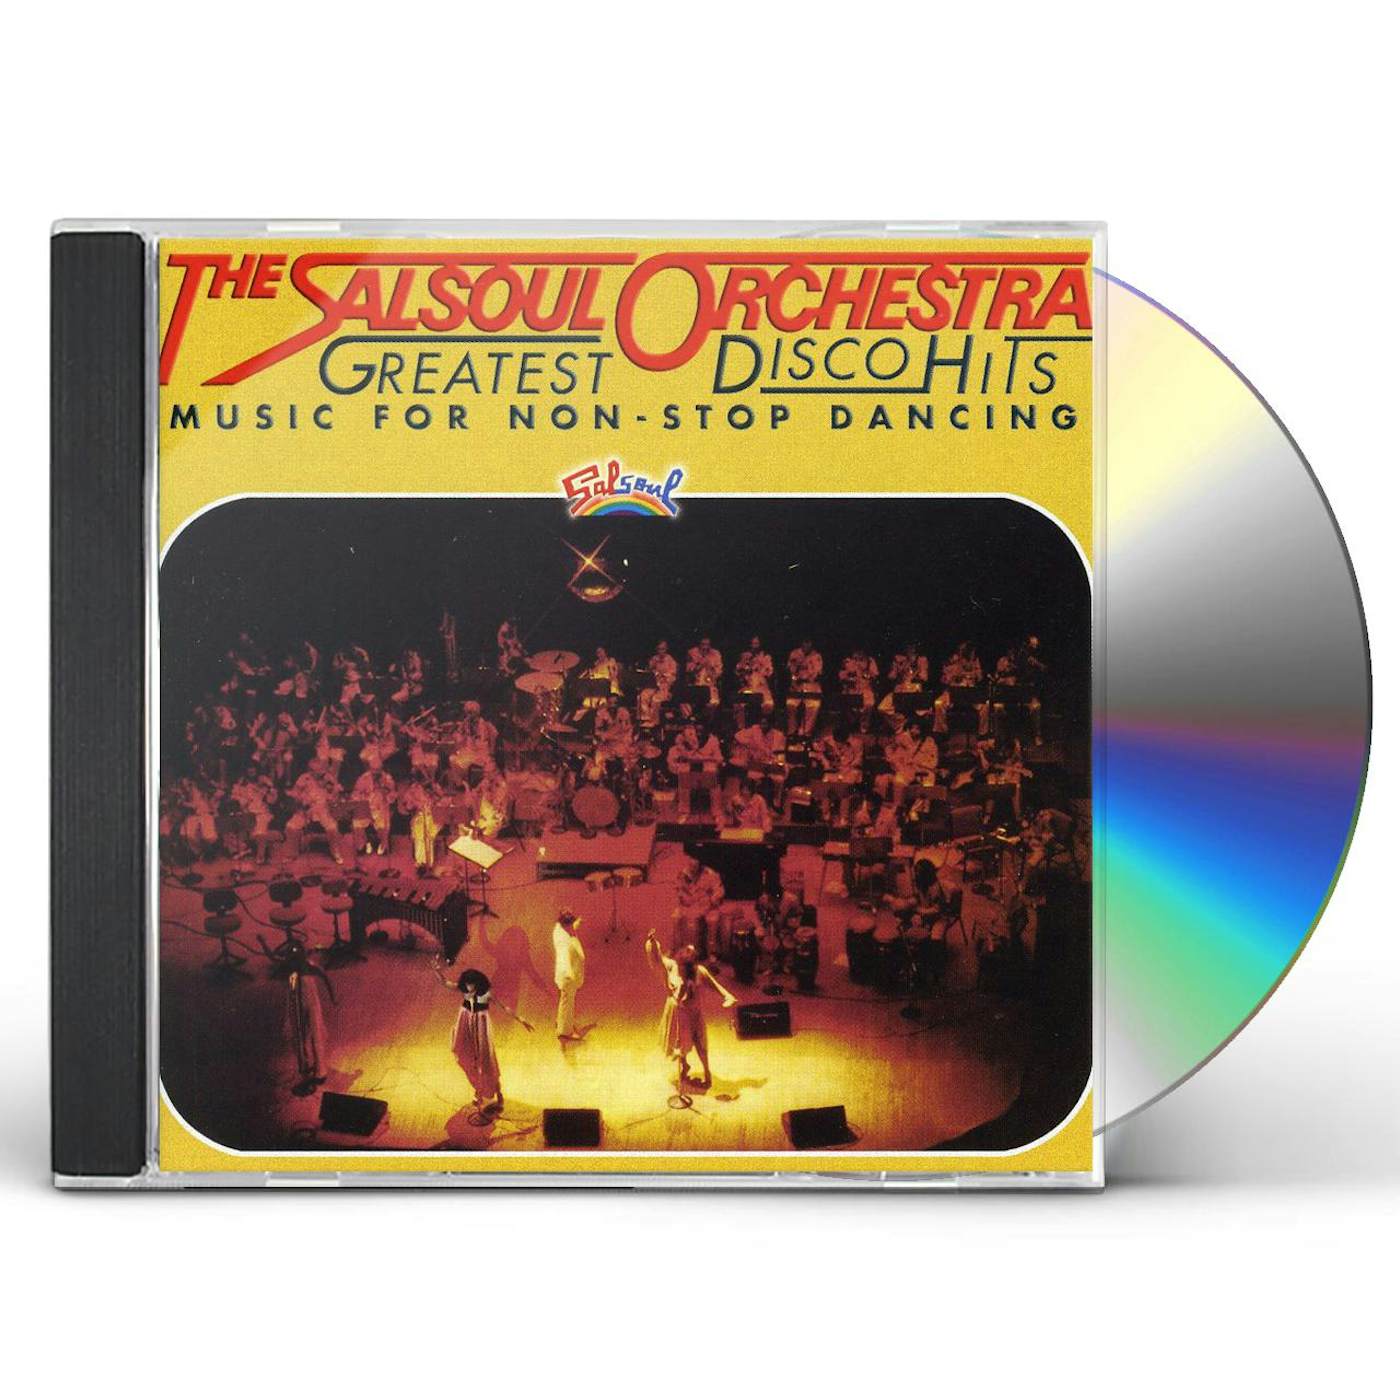 The Salsoul Orchestra GREATEST DISCO HITS CD